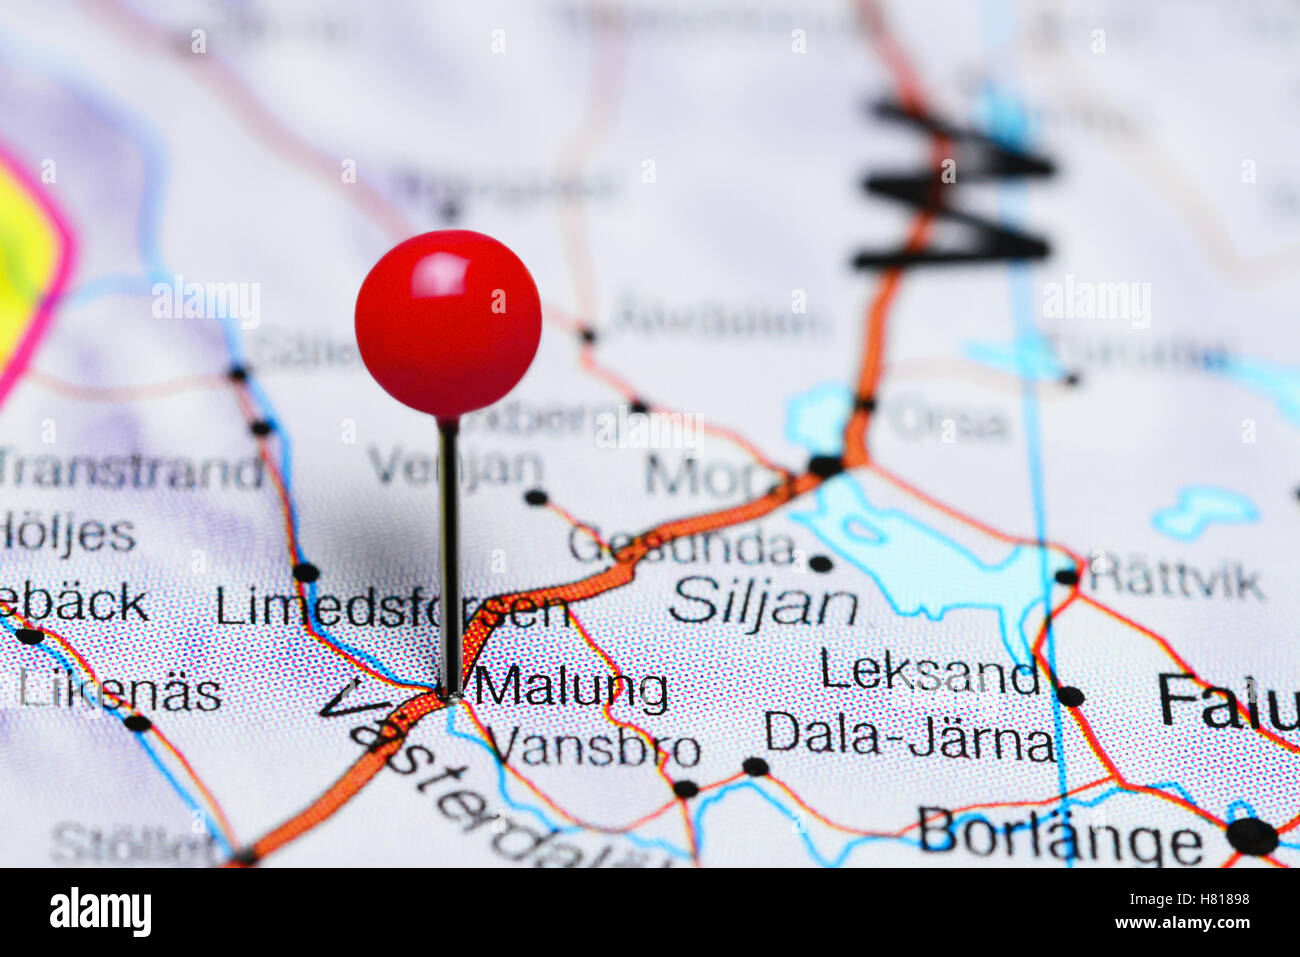 Malung pinned on a map of Sweden Stock Photo